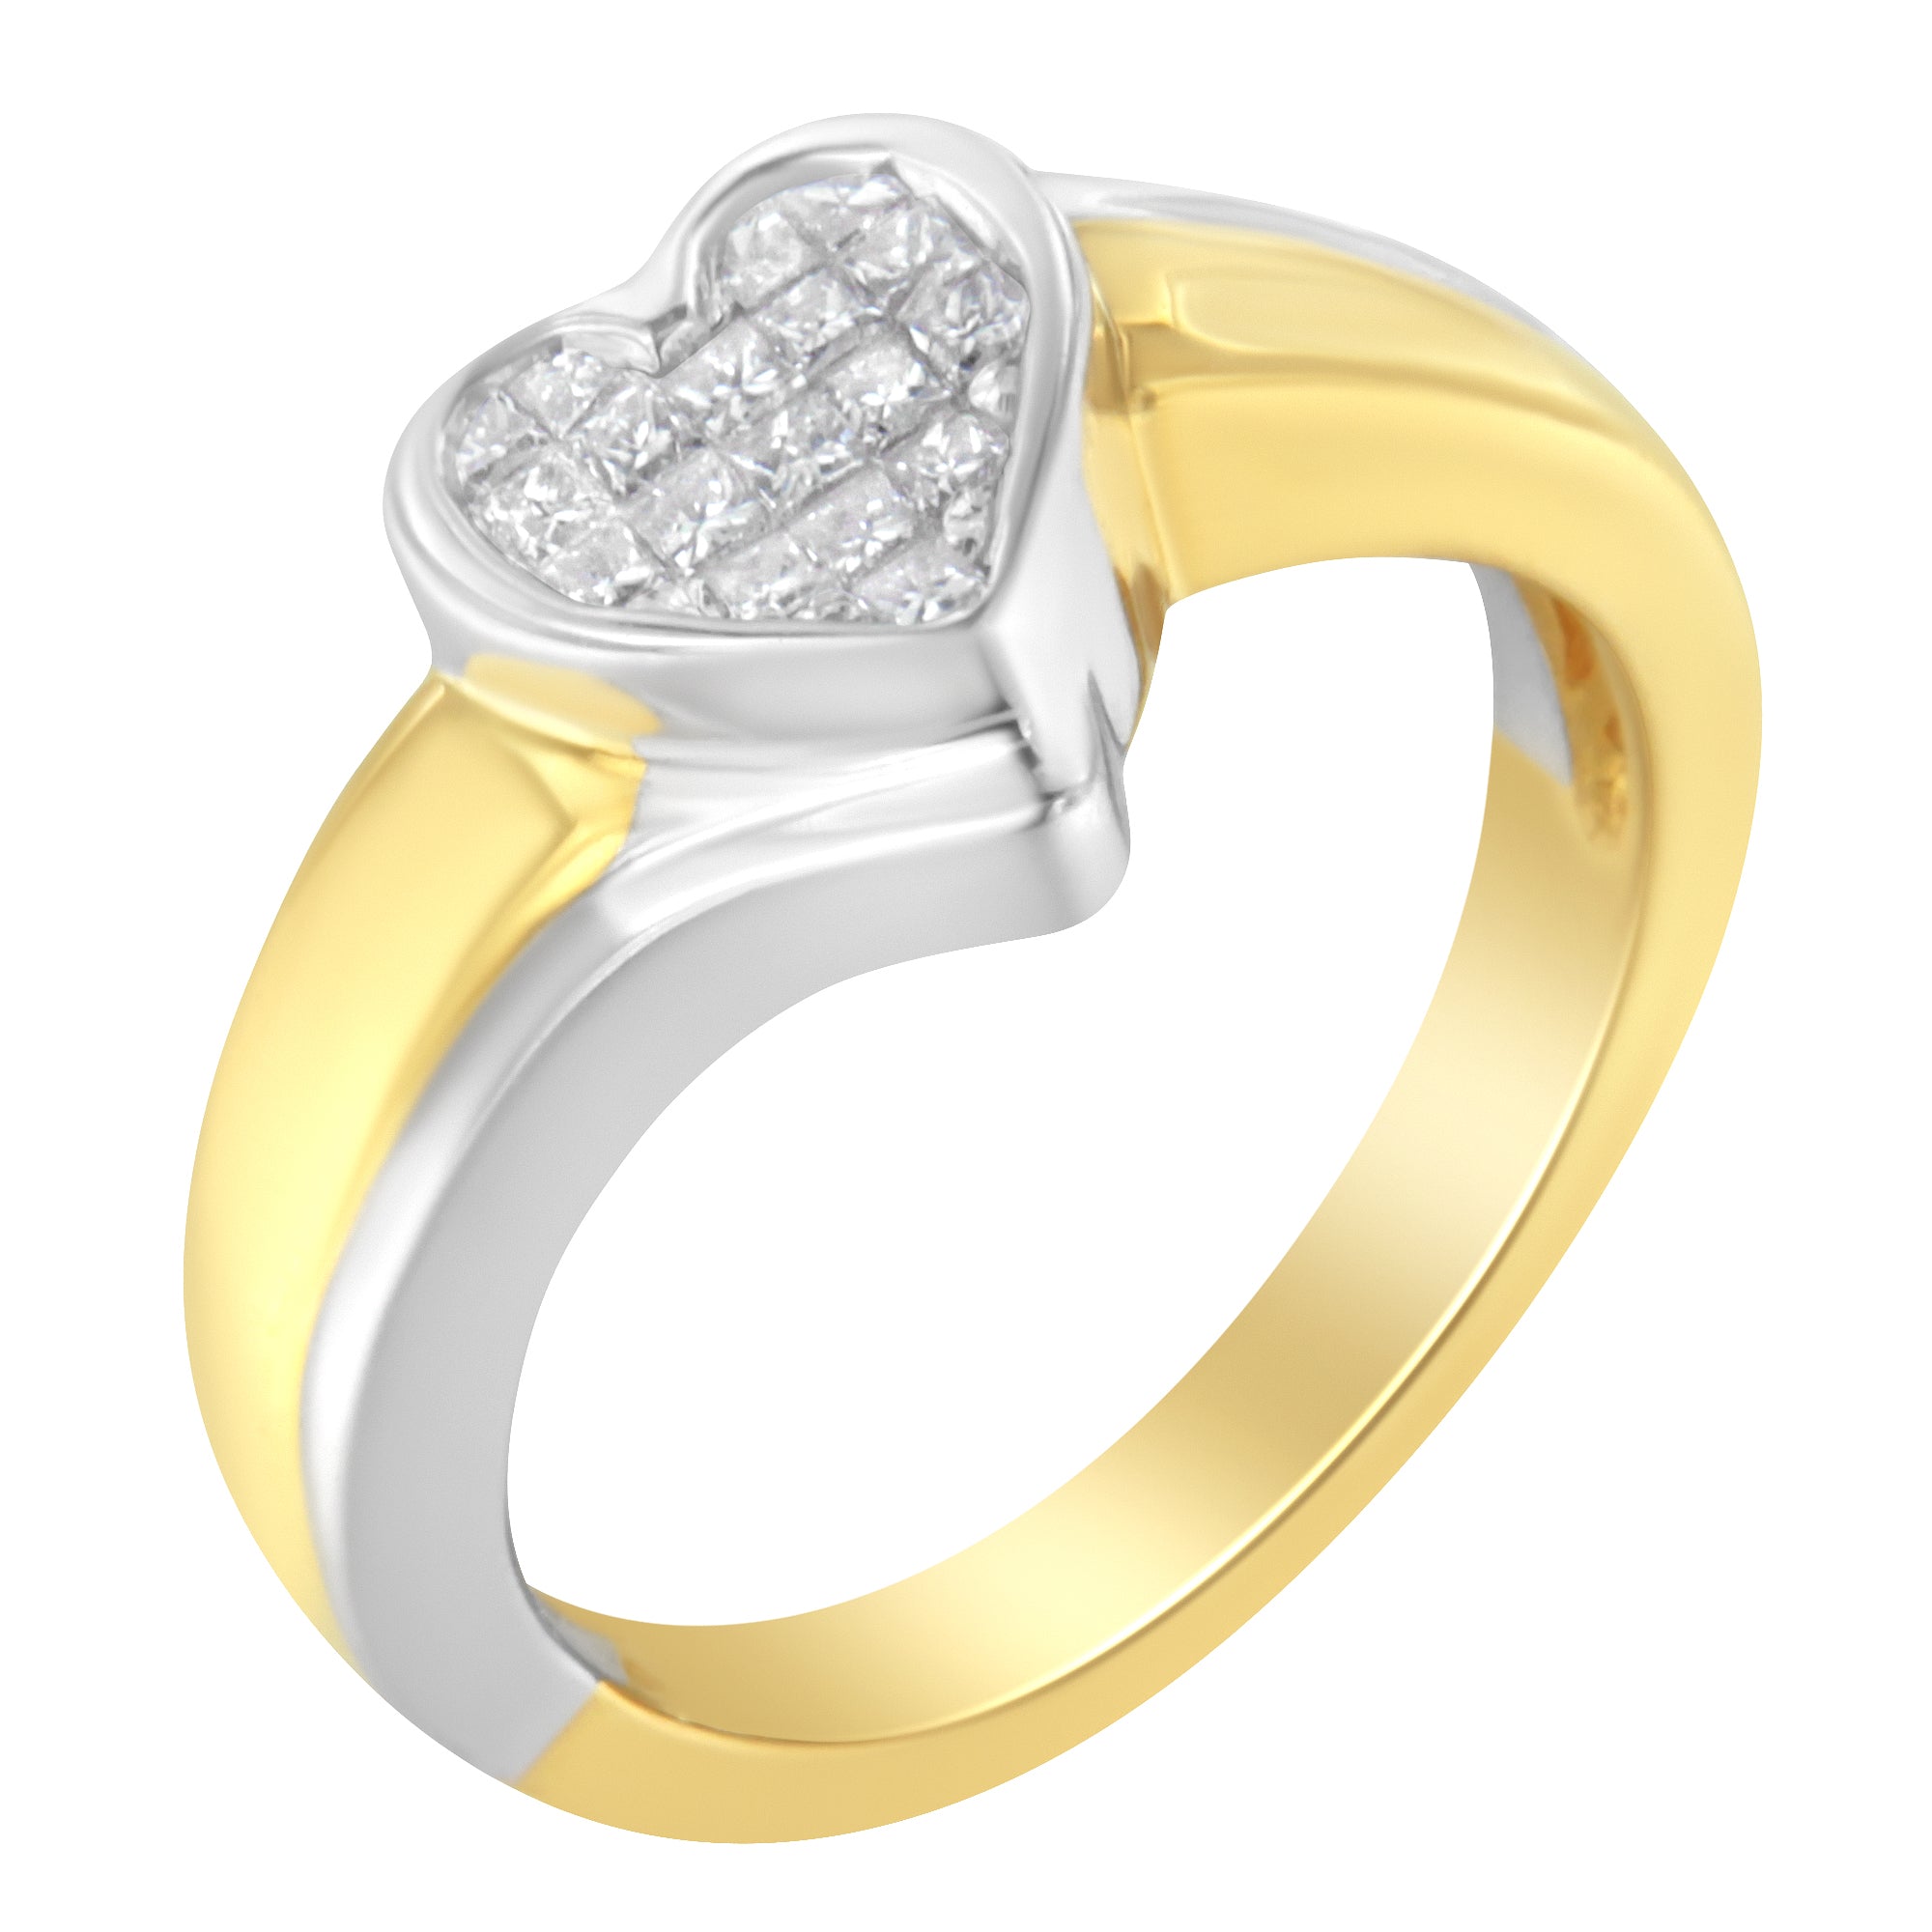 14K Two-Toned Gold Princess-Cut Diamond Heart Promise Ring (1/4 Cttw, H-I Color, I1-I2 Clarity) - Size 6 - LinkagejewelrydesignLinkagejewelrydesign